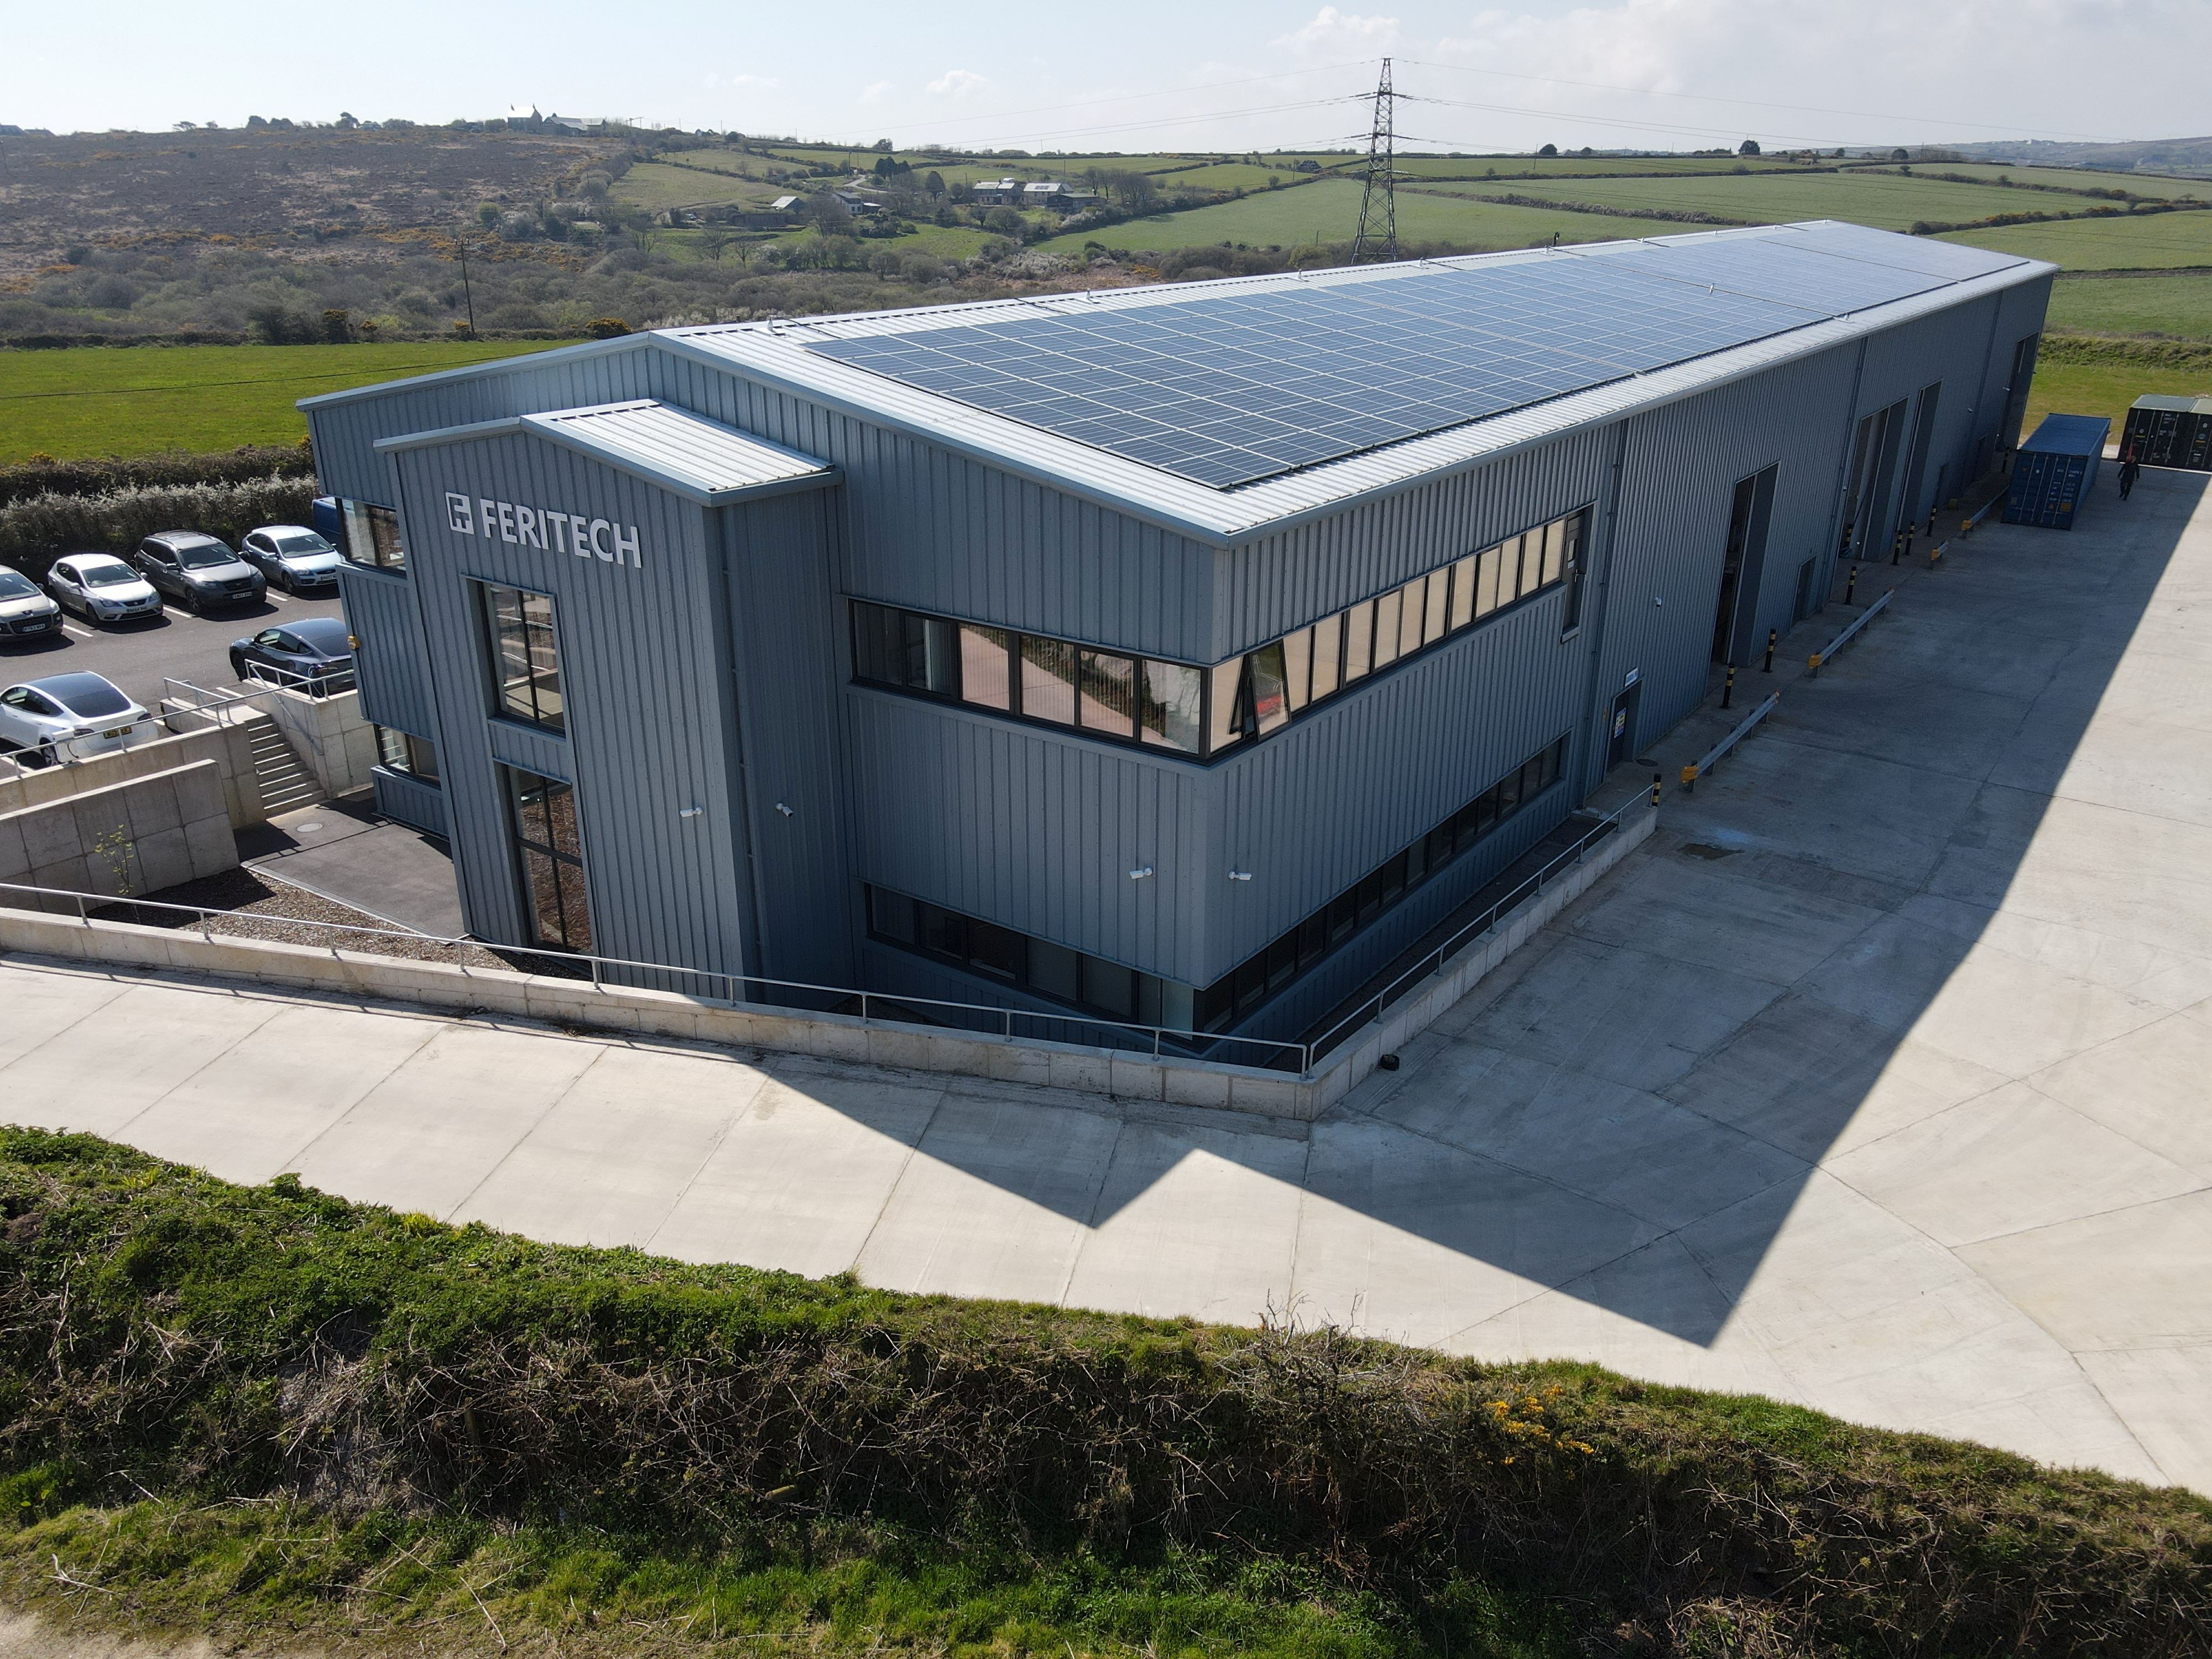 The Feritech Innovation Centre near Falmouth in Cornwall